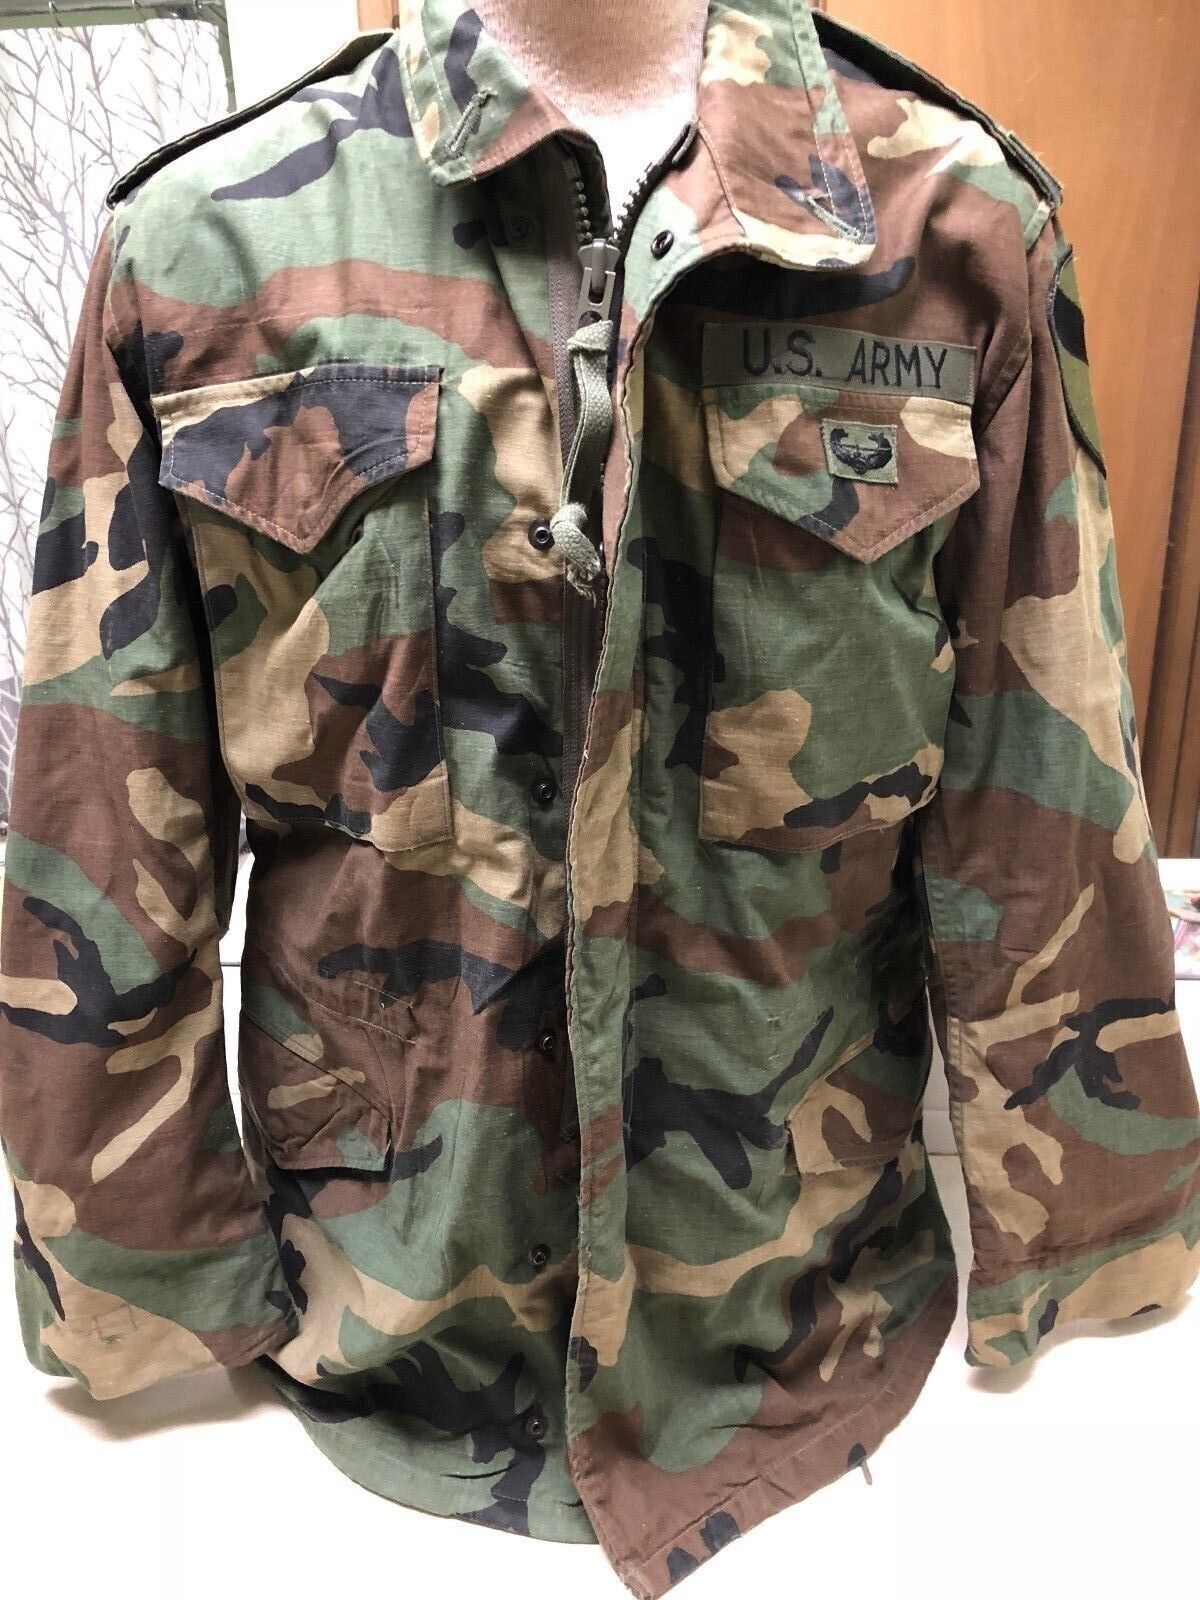 1989 US Military Camouflage Field Jacket - Size Small Long